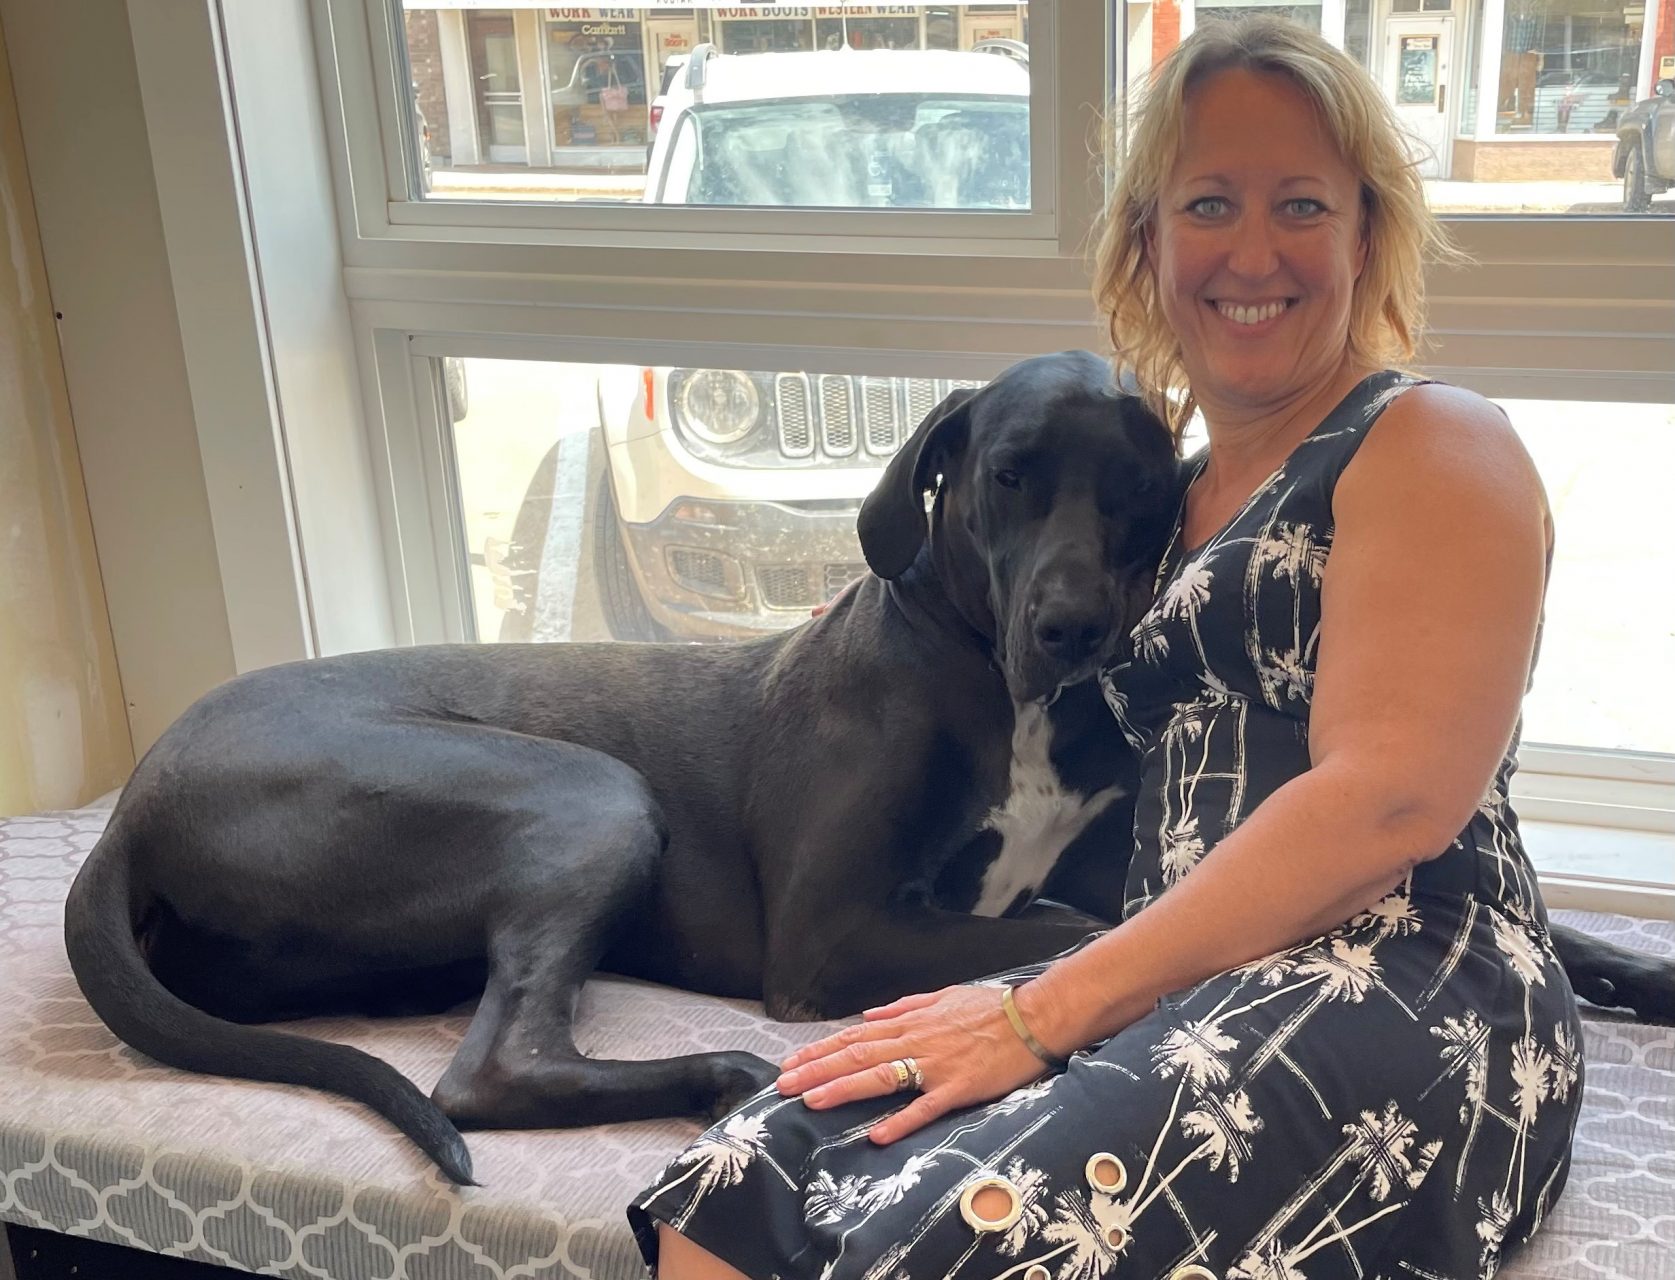 Photo of Lynda Johnson, Insurance Broker at heartland Insurance Services with her Great Dane Nui.